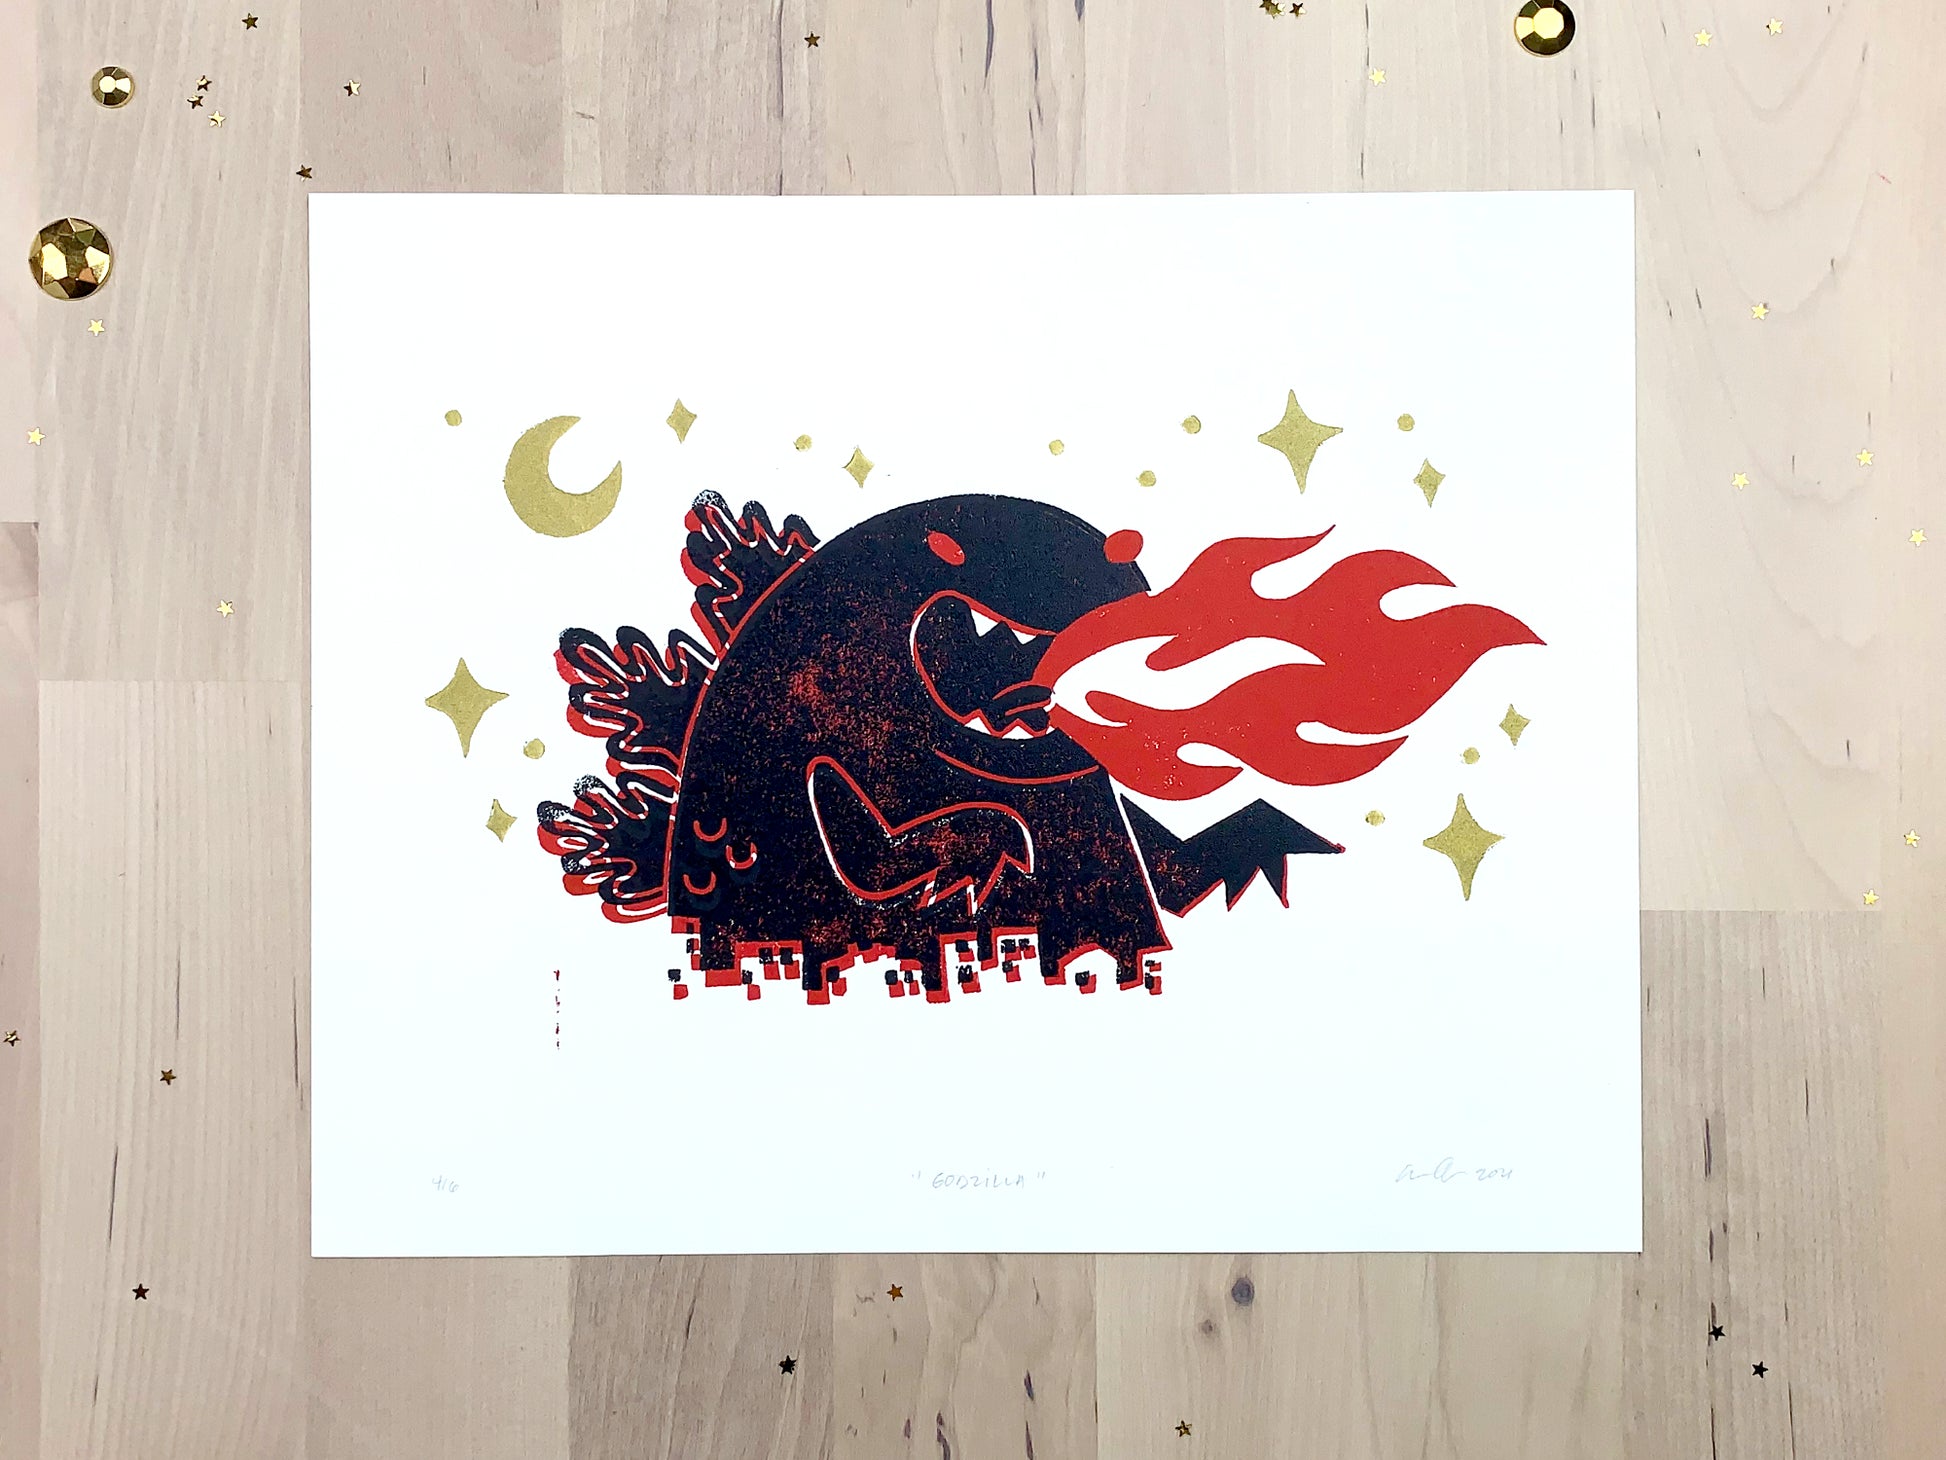 Original limited edition #4 art print by Amber Orenstein. Two color, red and black, reduction block print of a Japanese kaiju monster roaring with flames while destroying a city with gold stars and moon.